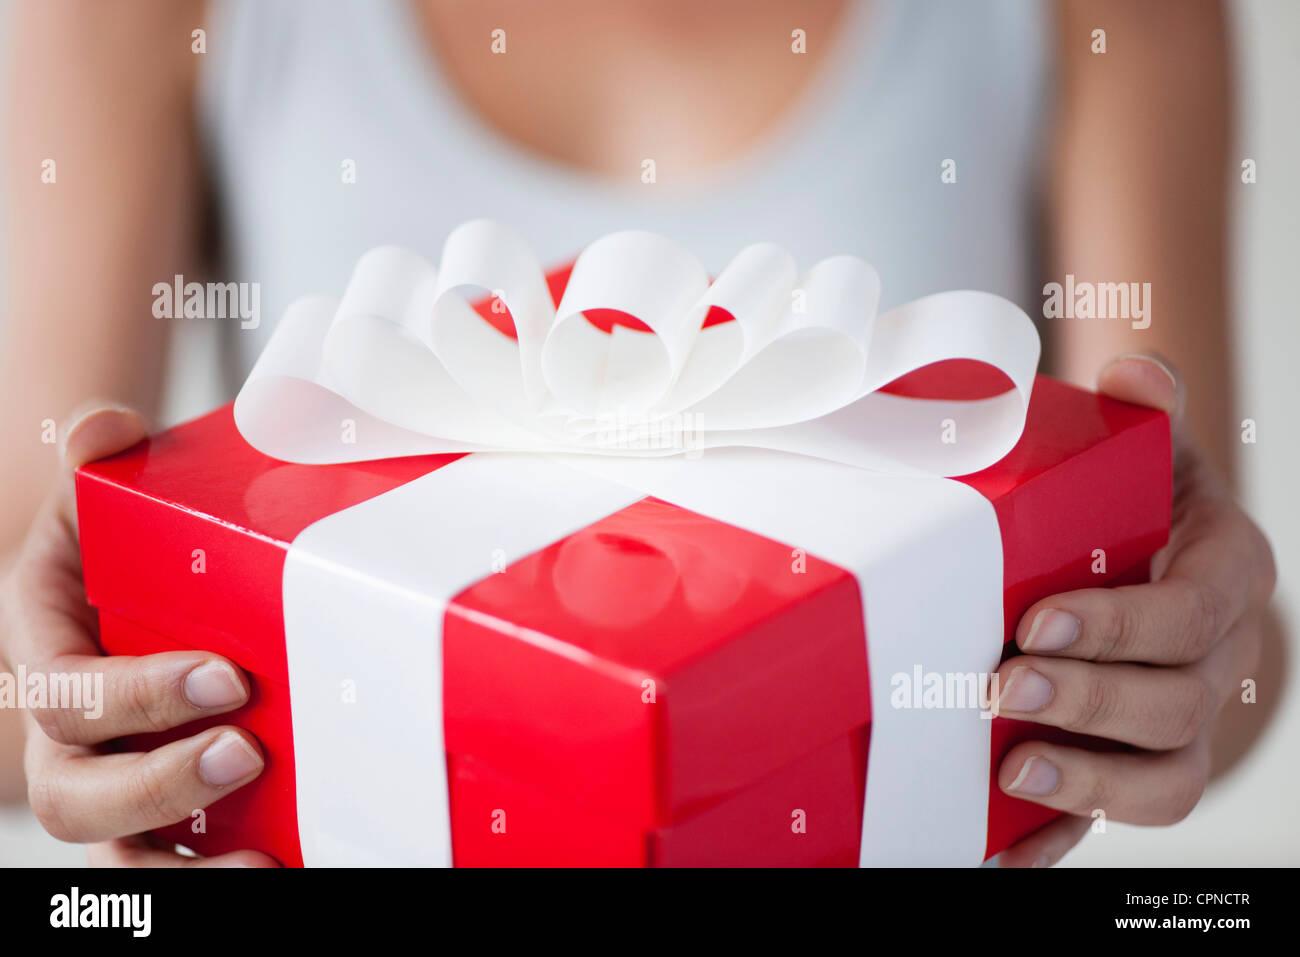 Woman holding gift box, cropped Stock Photo